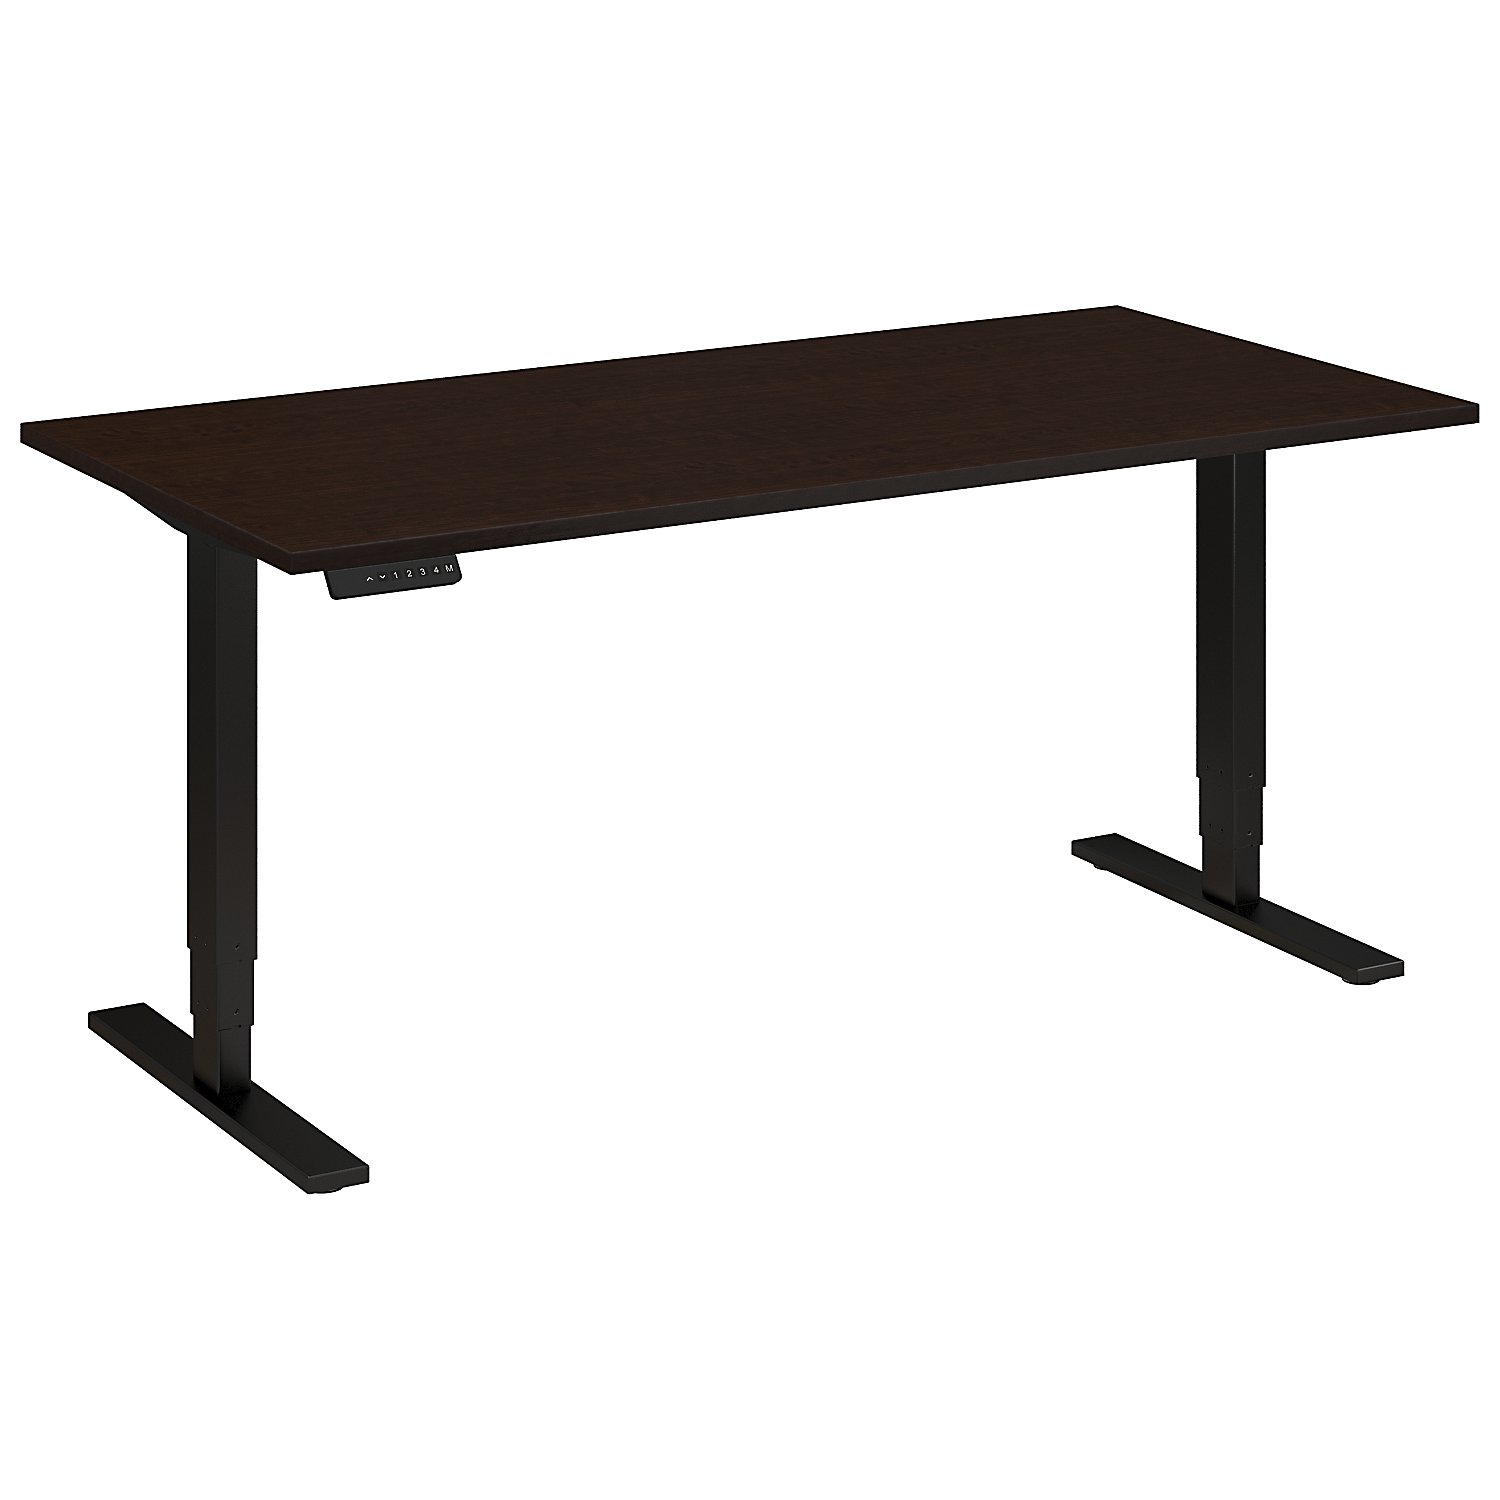 Adjustable Height Desks from BBF - Shown in Mocha Cherry woodgrain laminate top and black base